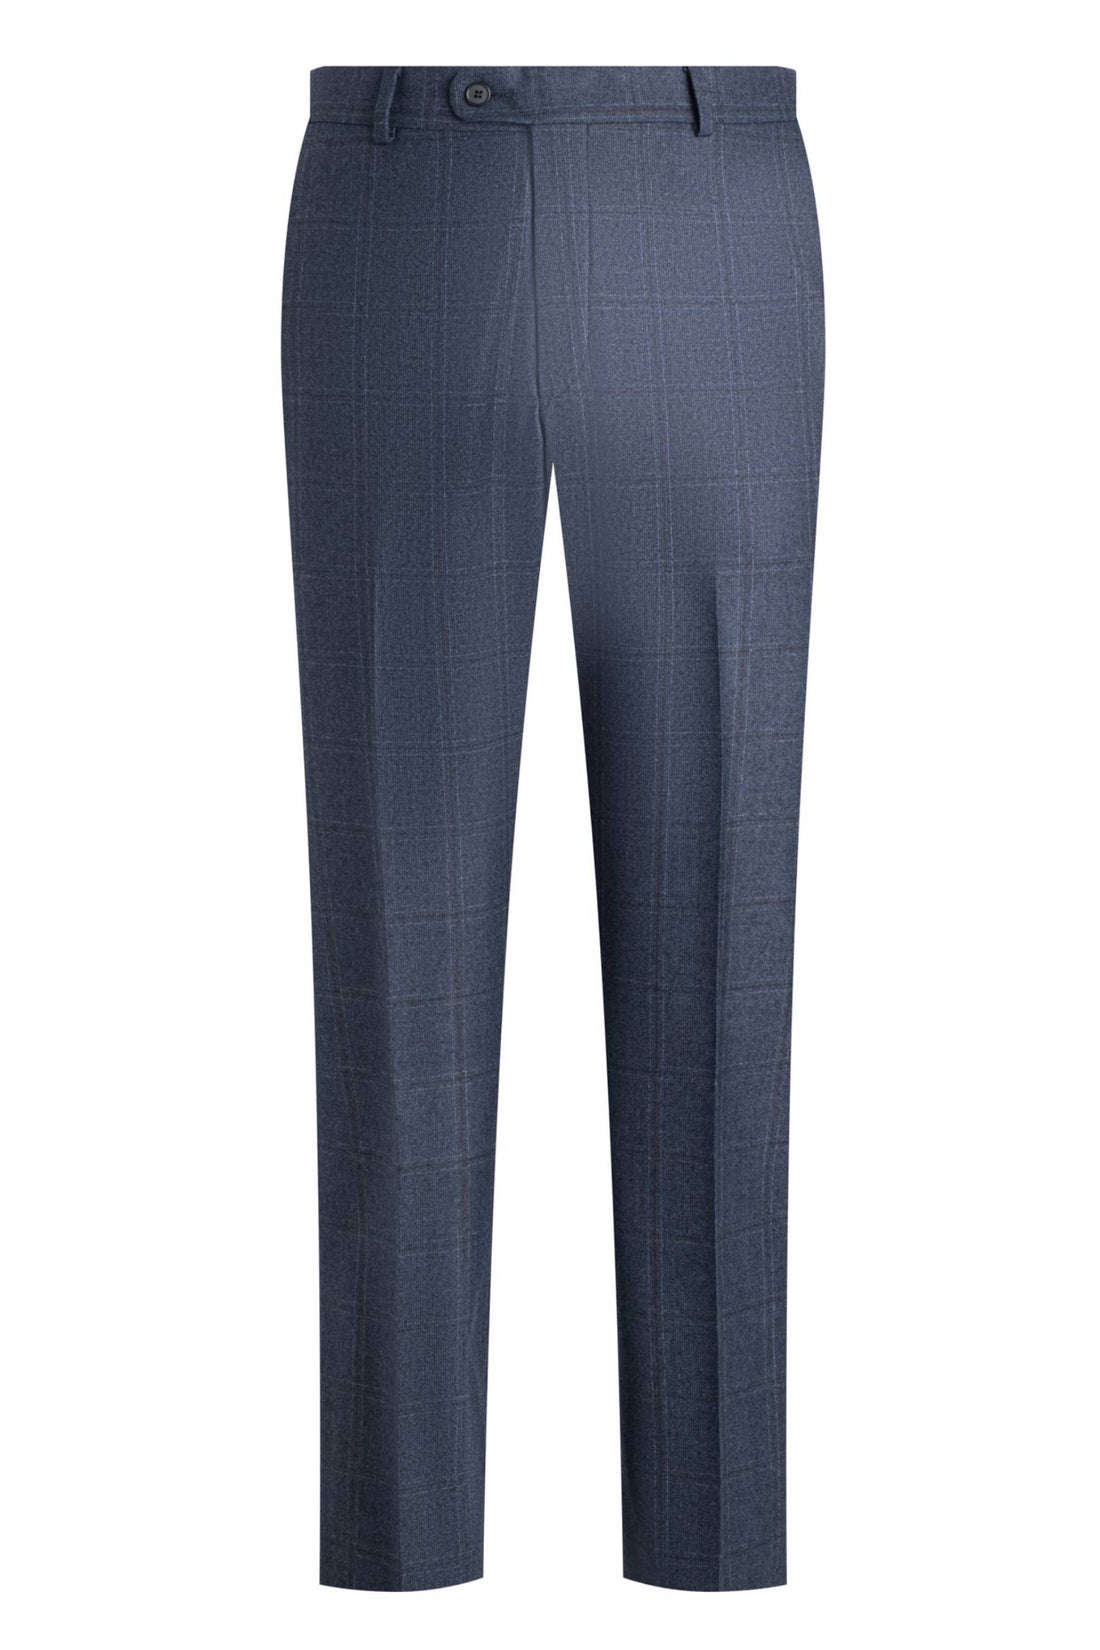 Heritage Gold Dark Blue 120'S WP Neat Suit Front Pant